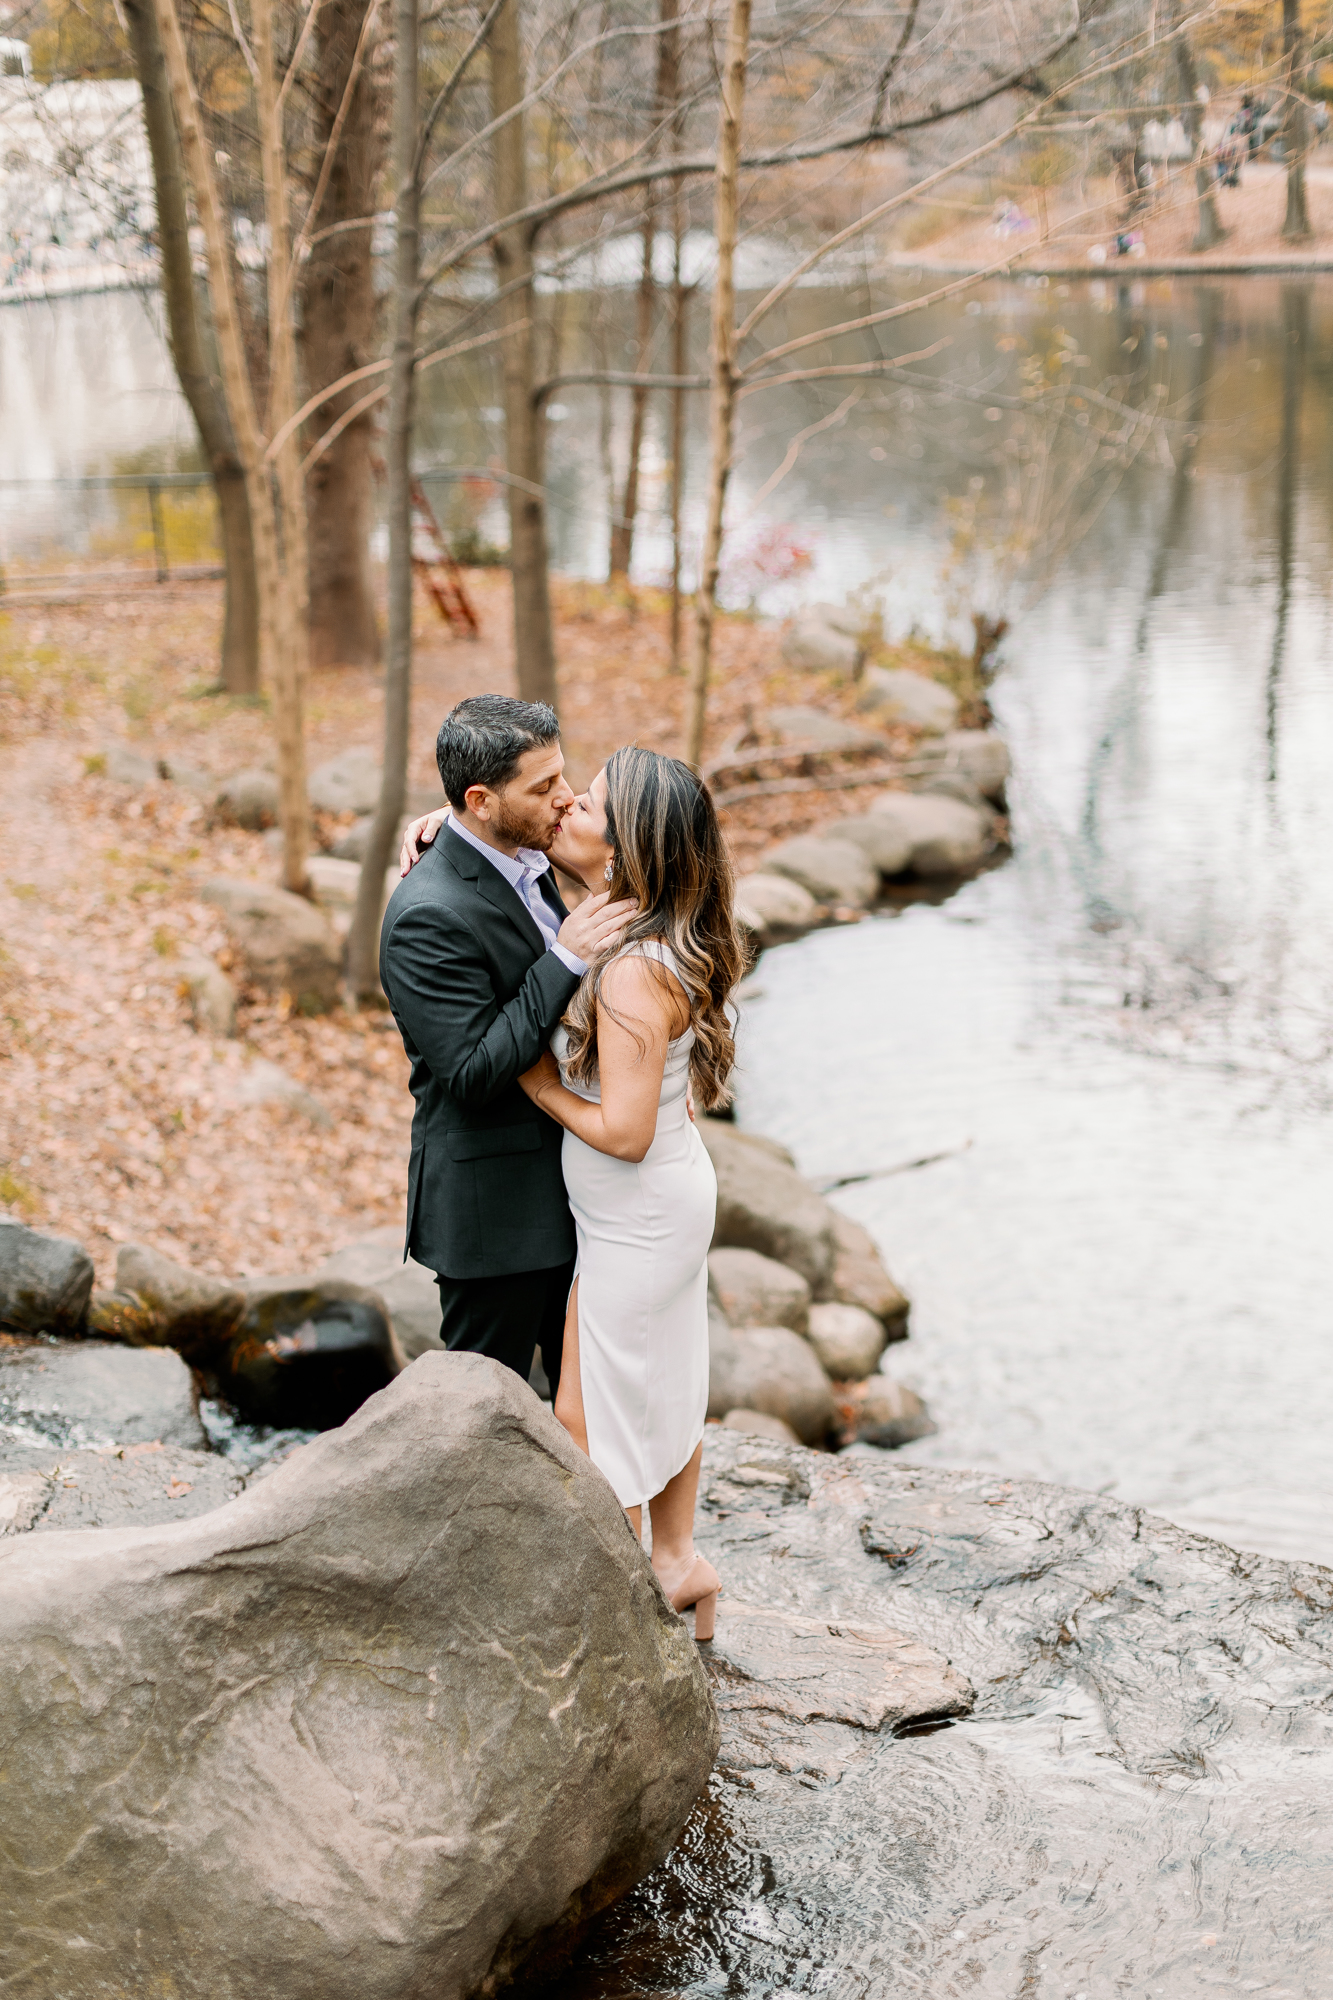 Picturesque Fall Brooklyn Engagement Photos at Prospect Park